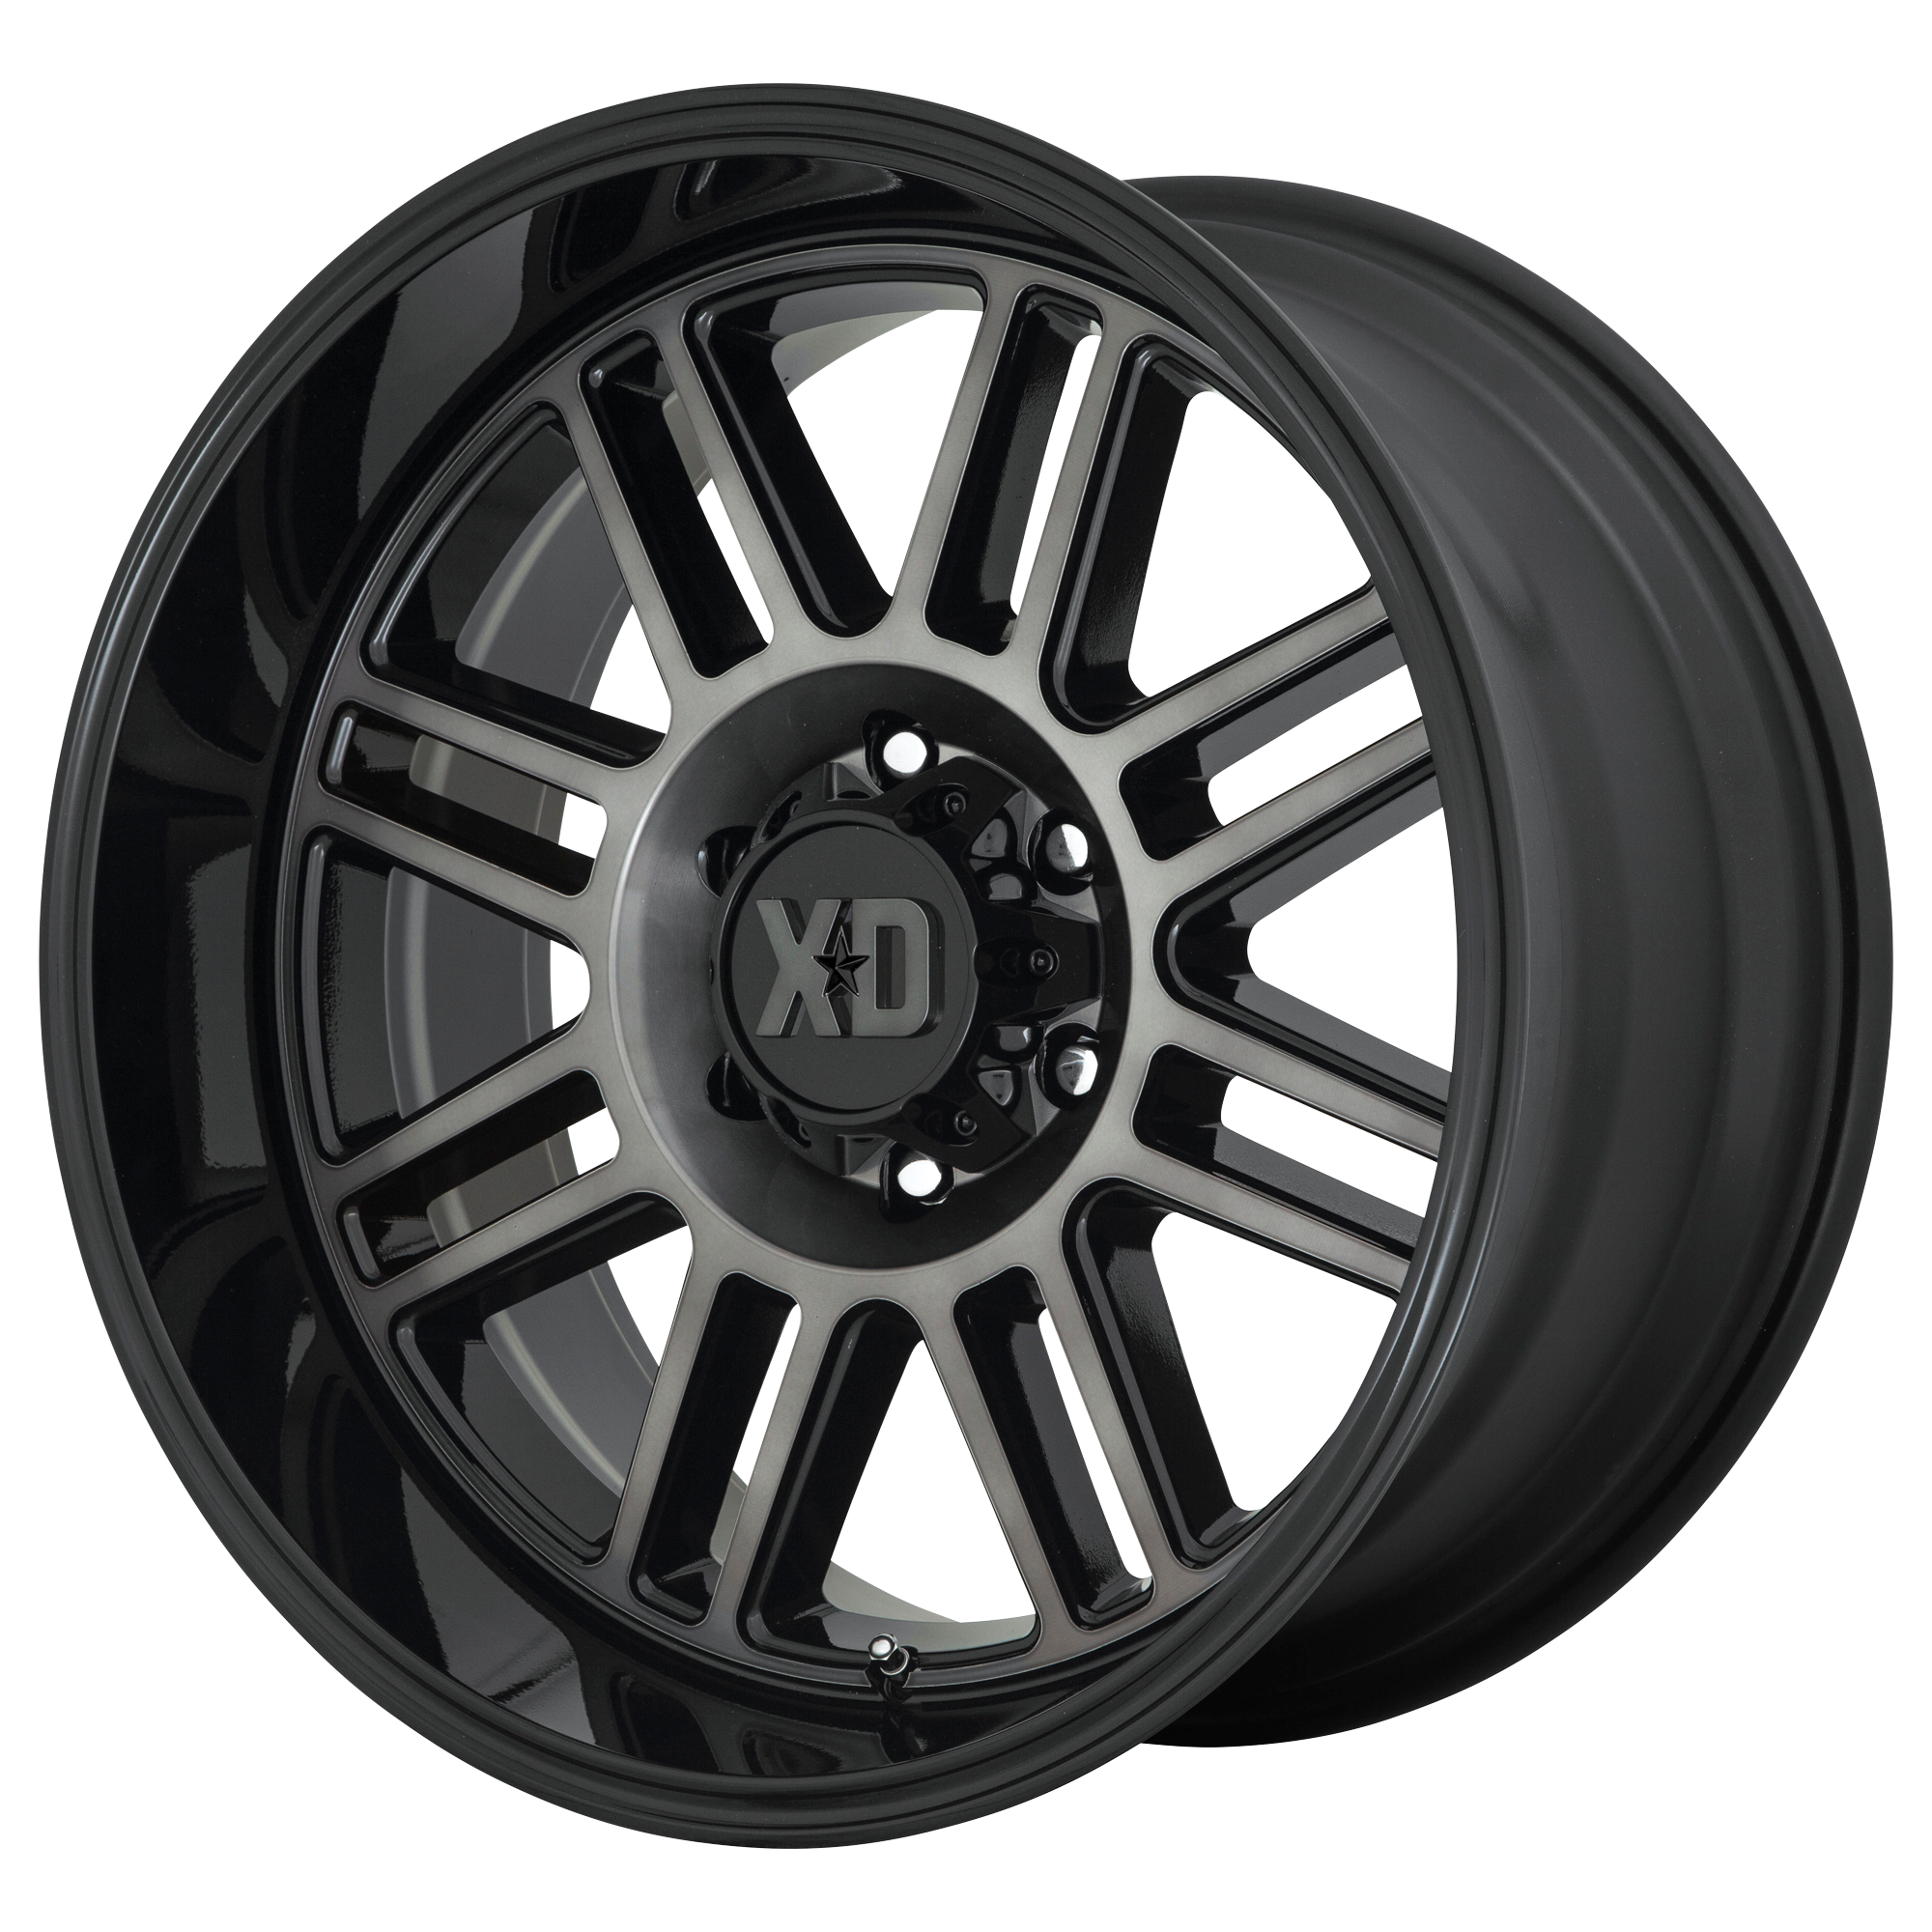 CAGE 20x9 6x139.70 GLOSS BLACK W/ GRAY TINT (18 mm) - Tires and Engine Performance